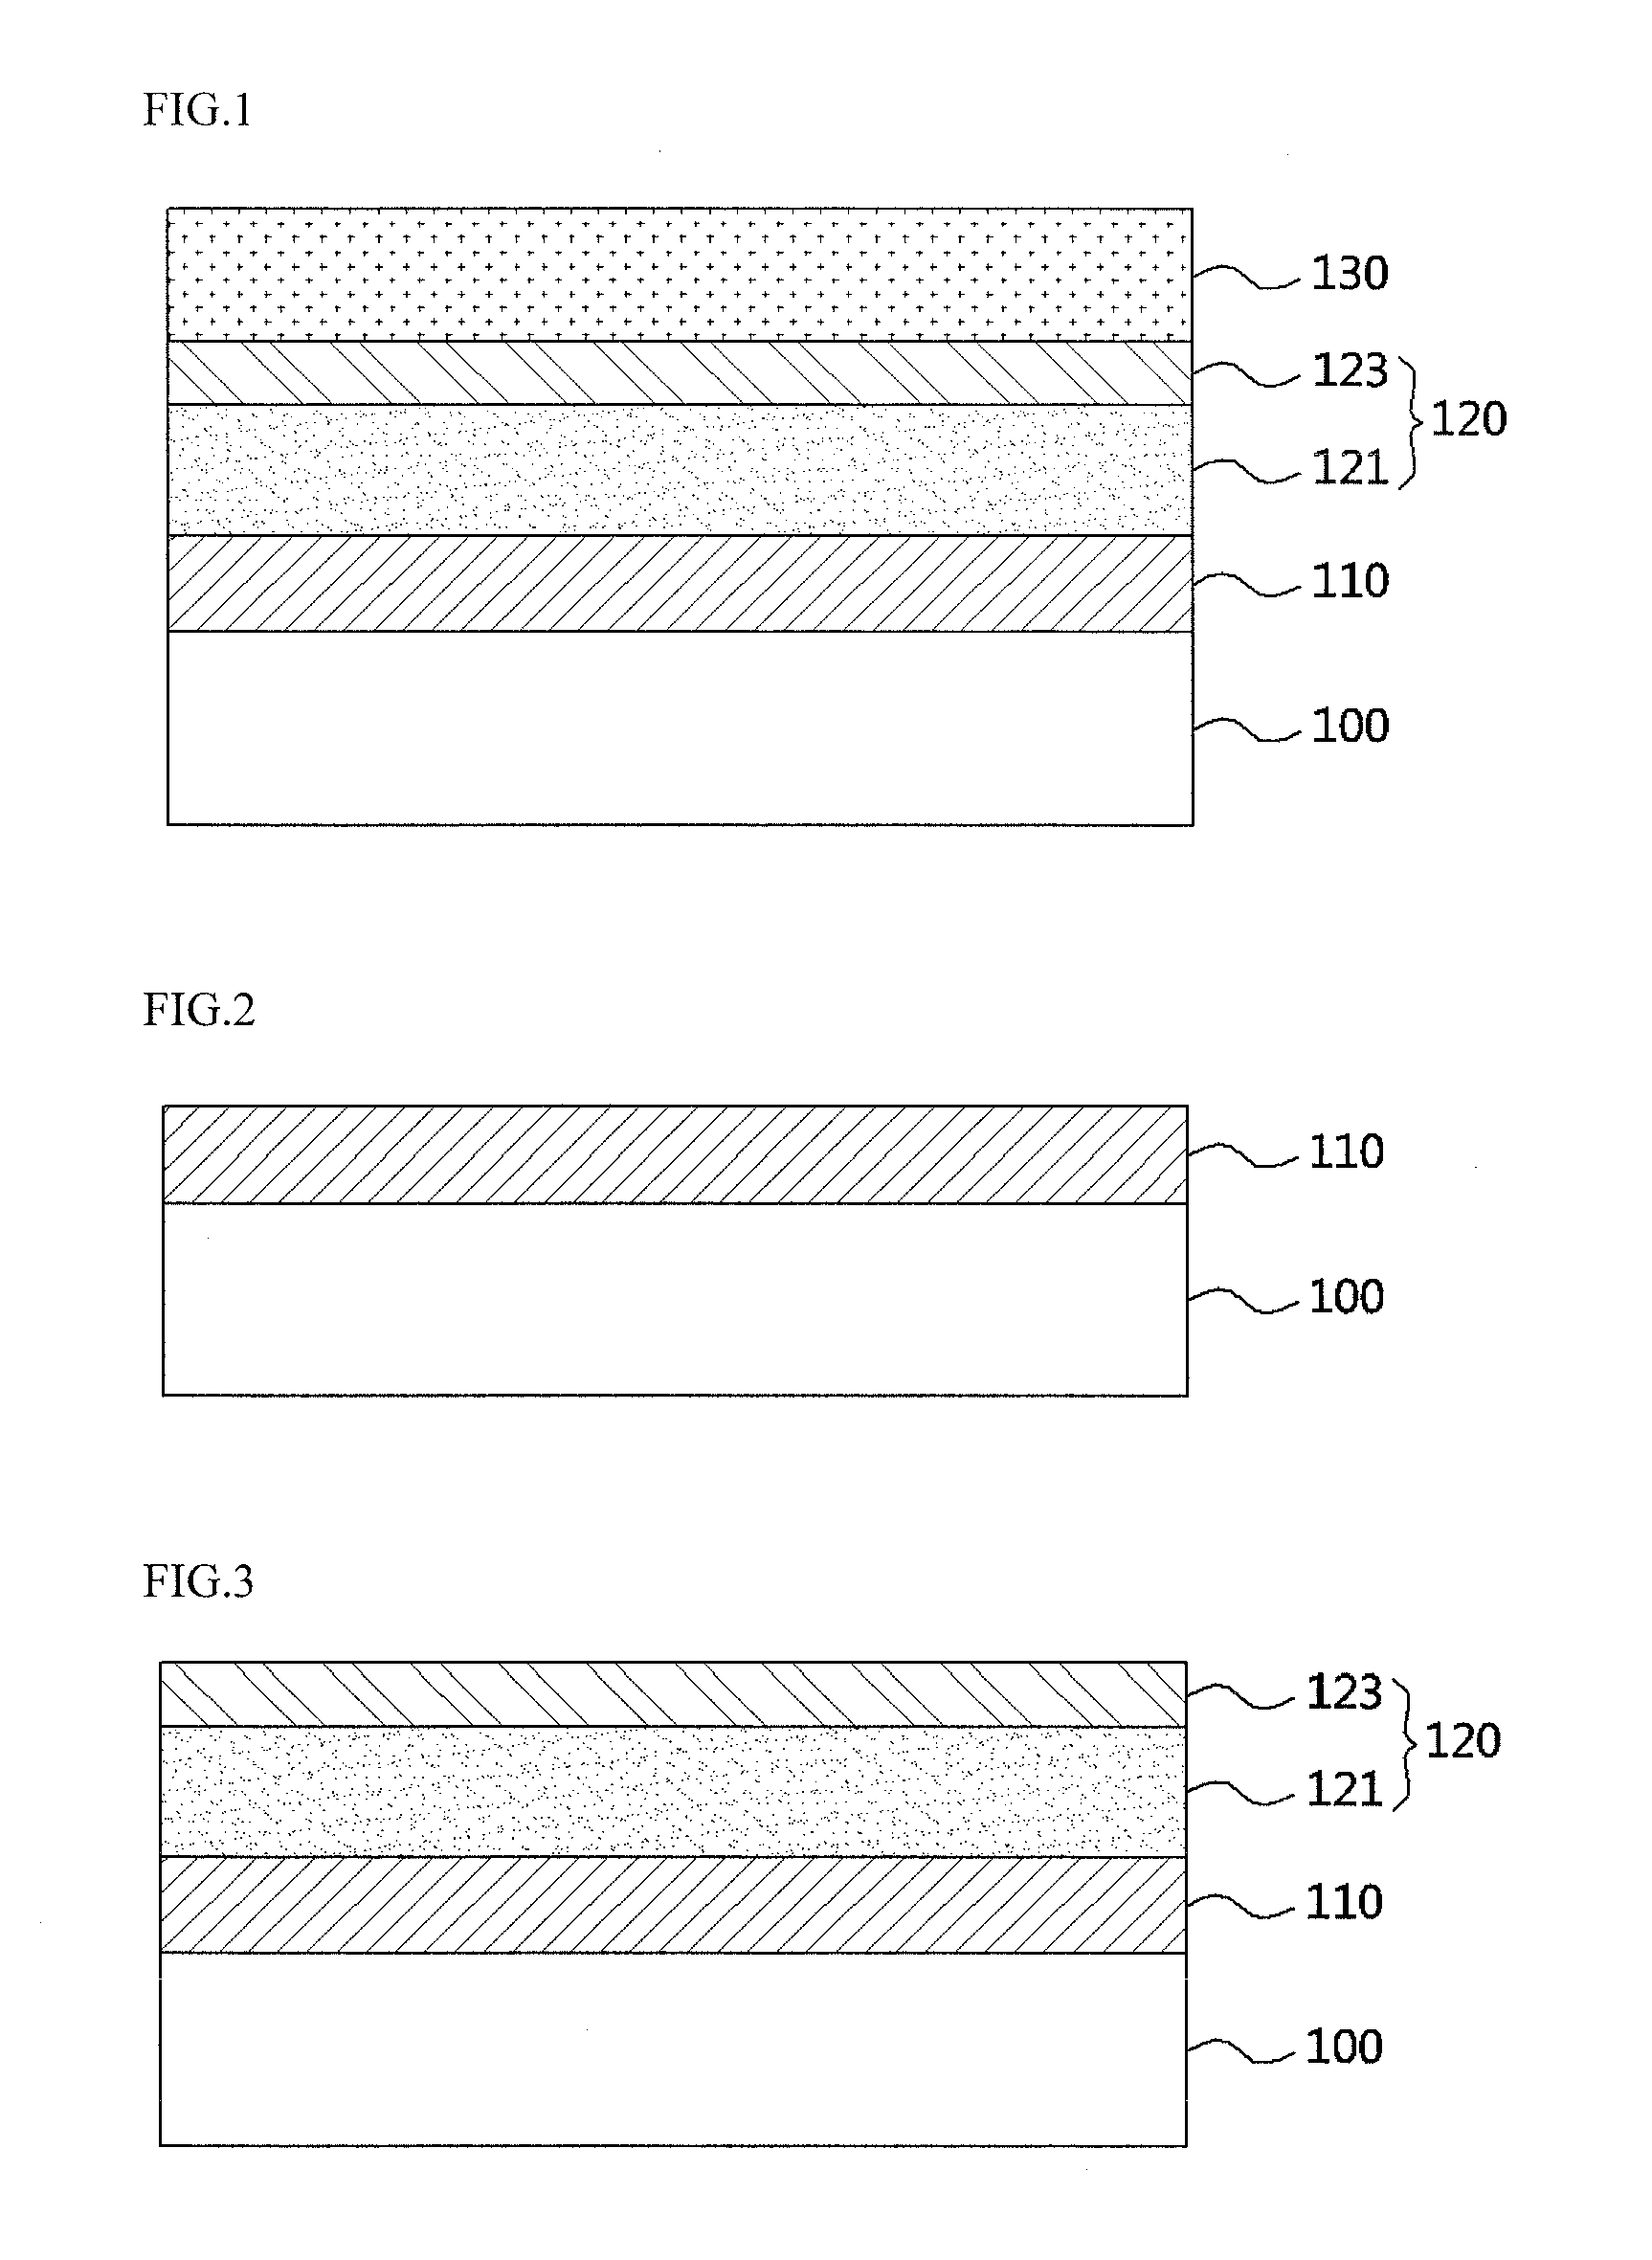 Resistive memory having rectifying characteristics or an ohmic contact layer